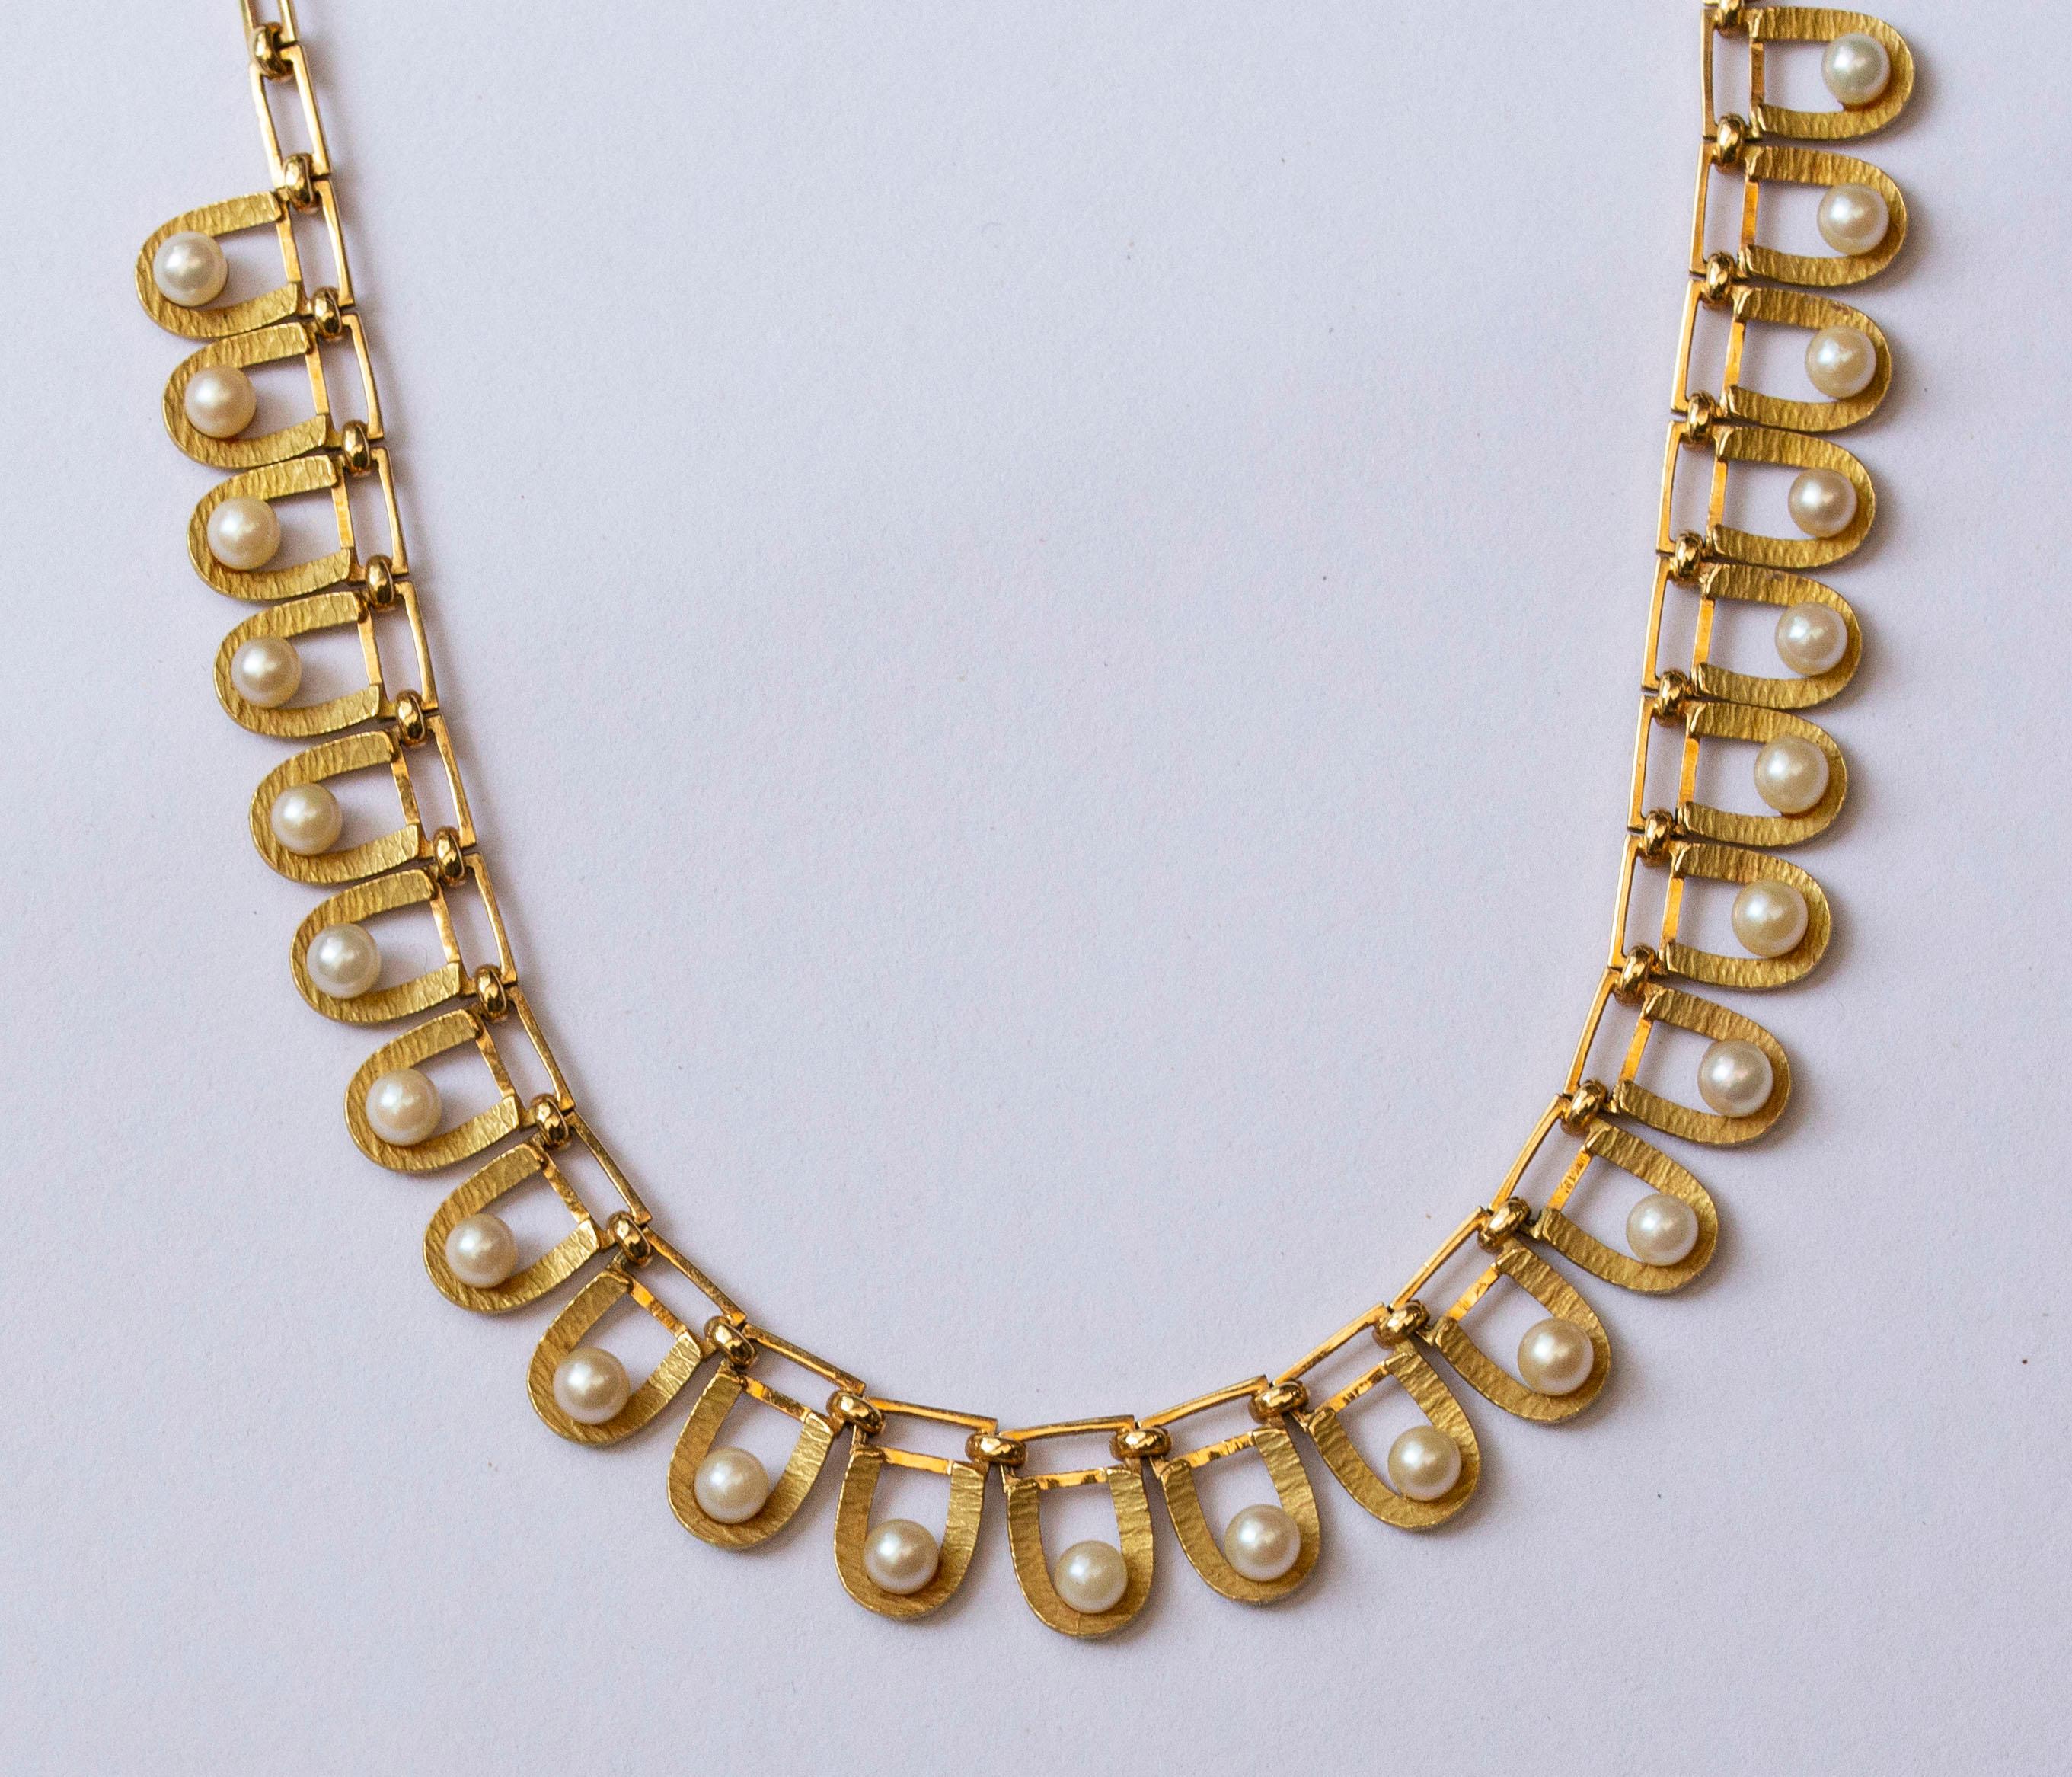 Retro 14 Karat Yellow Gold Choker Link Necklace with Cultivated Akoya Pearls 